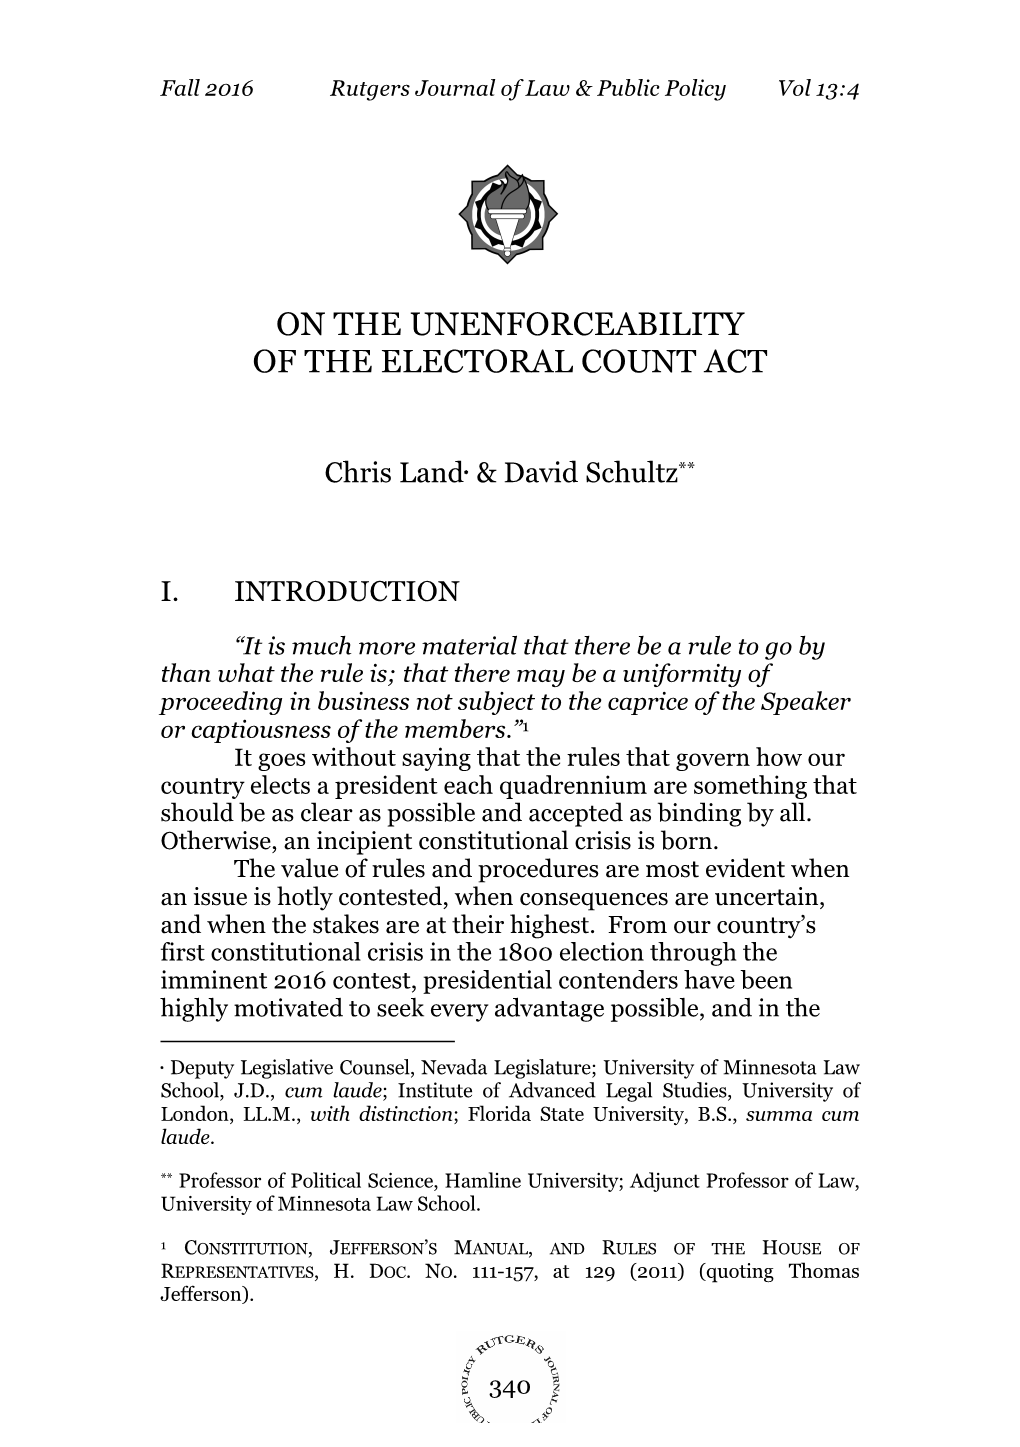 On the Unenforceability of the Electoral Count Act